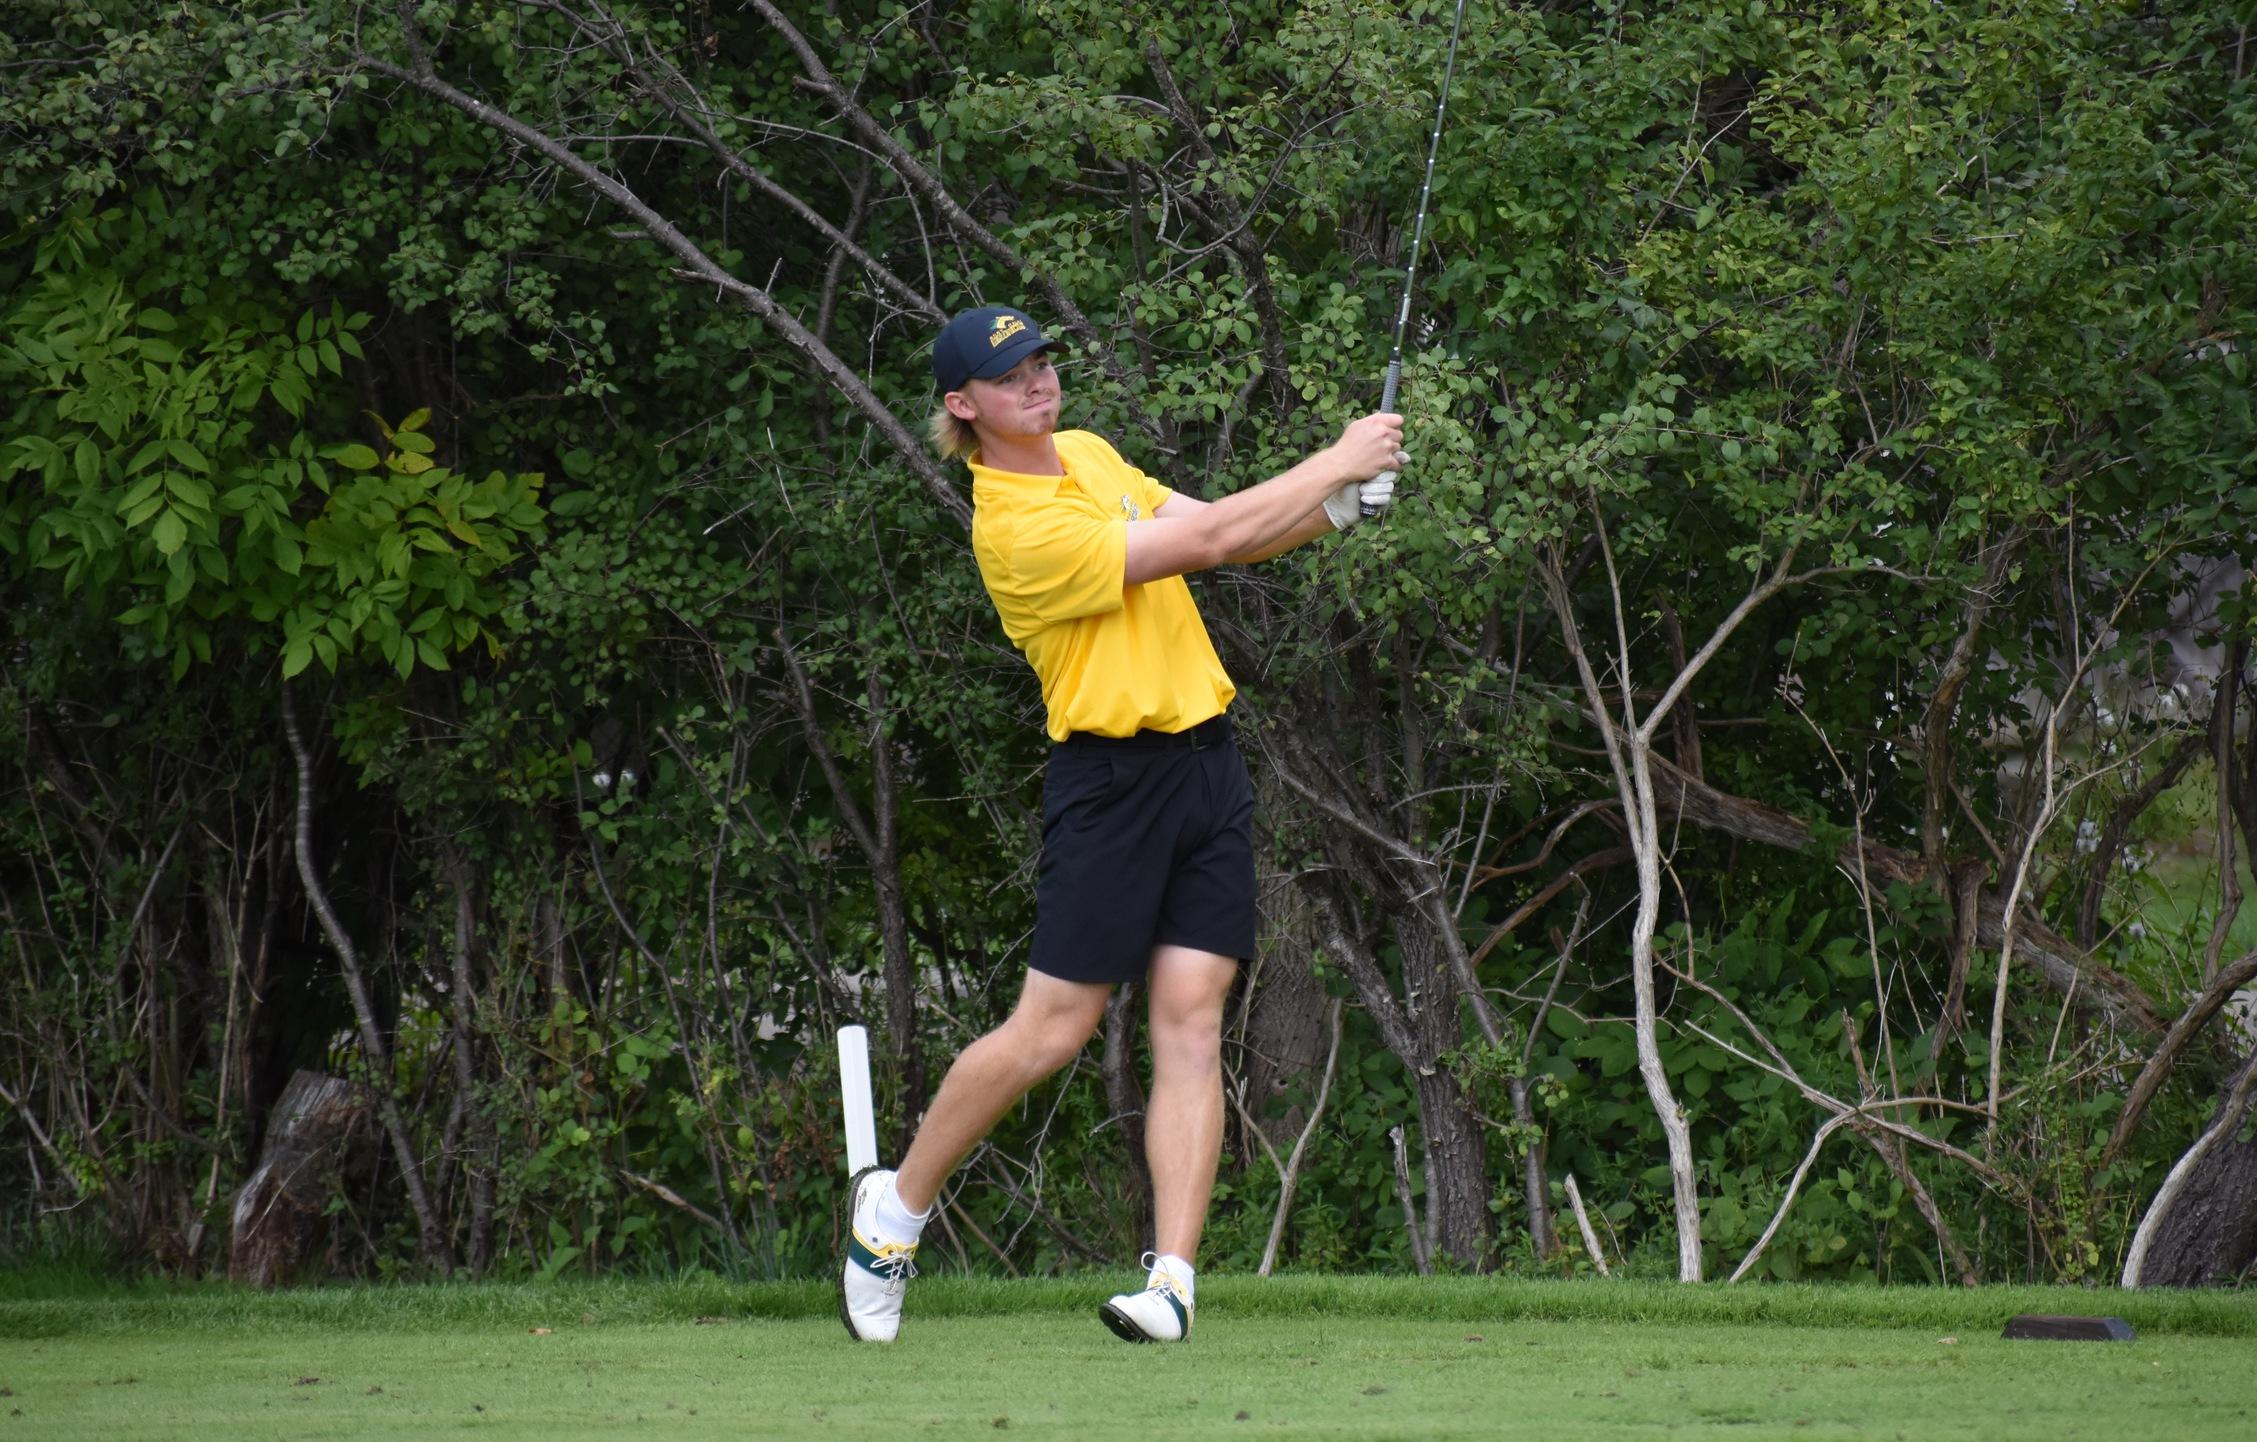 Men's Golf take Fourth at Oswego State Fall Invitational over the Weekend